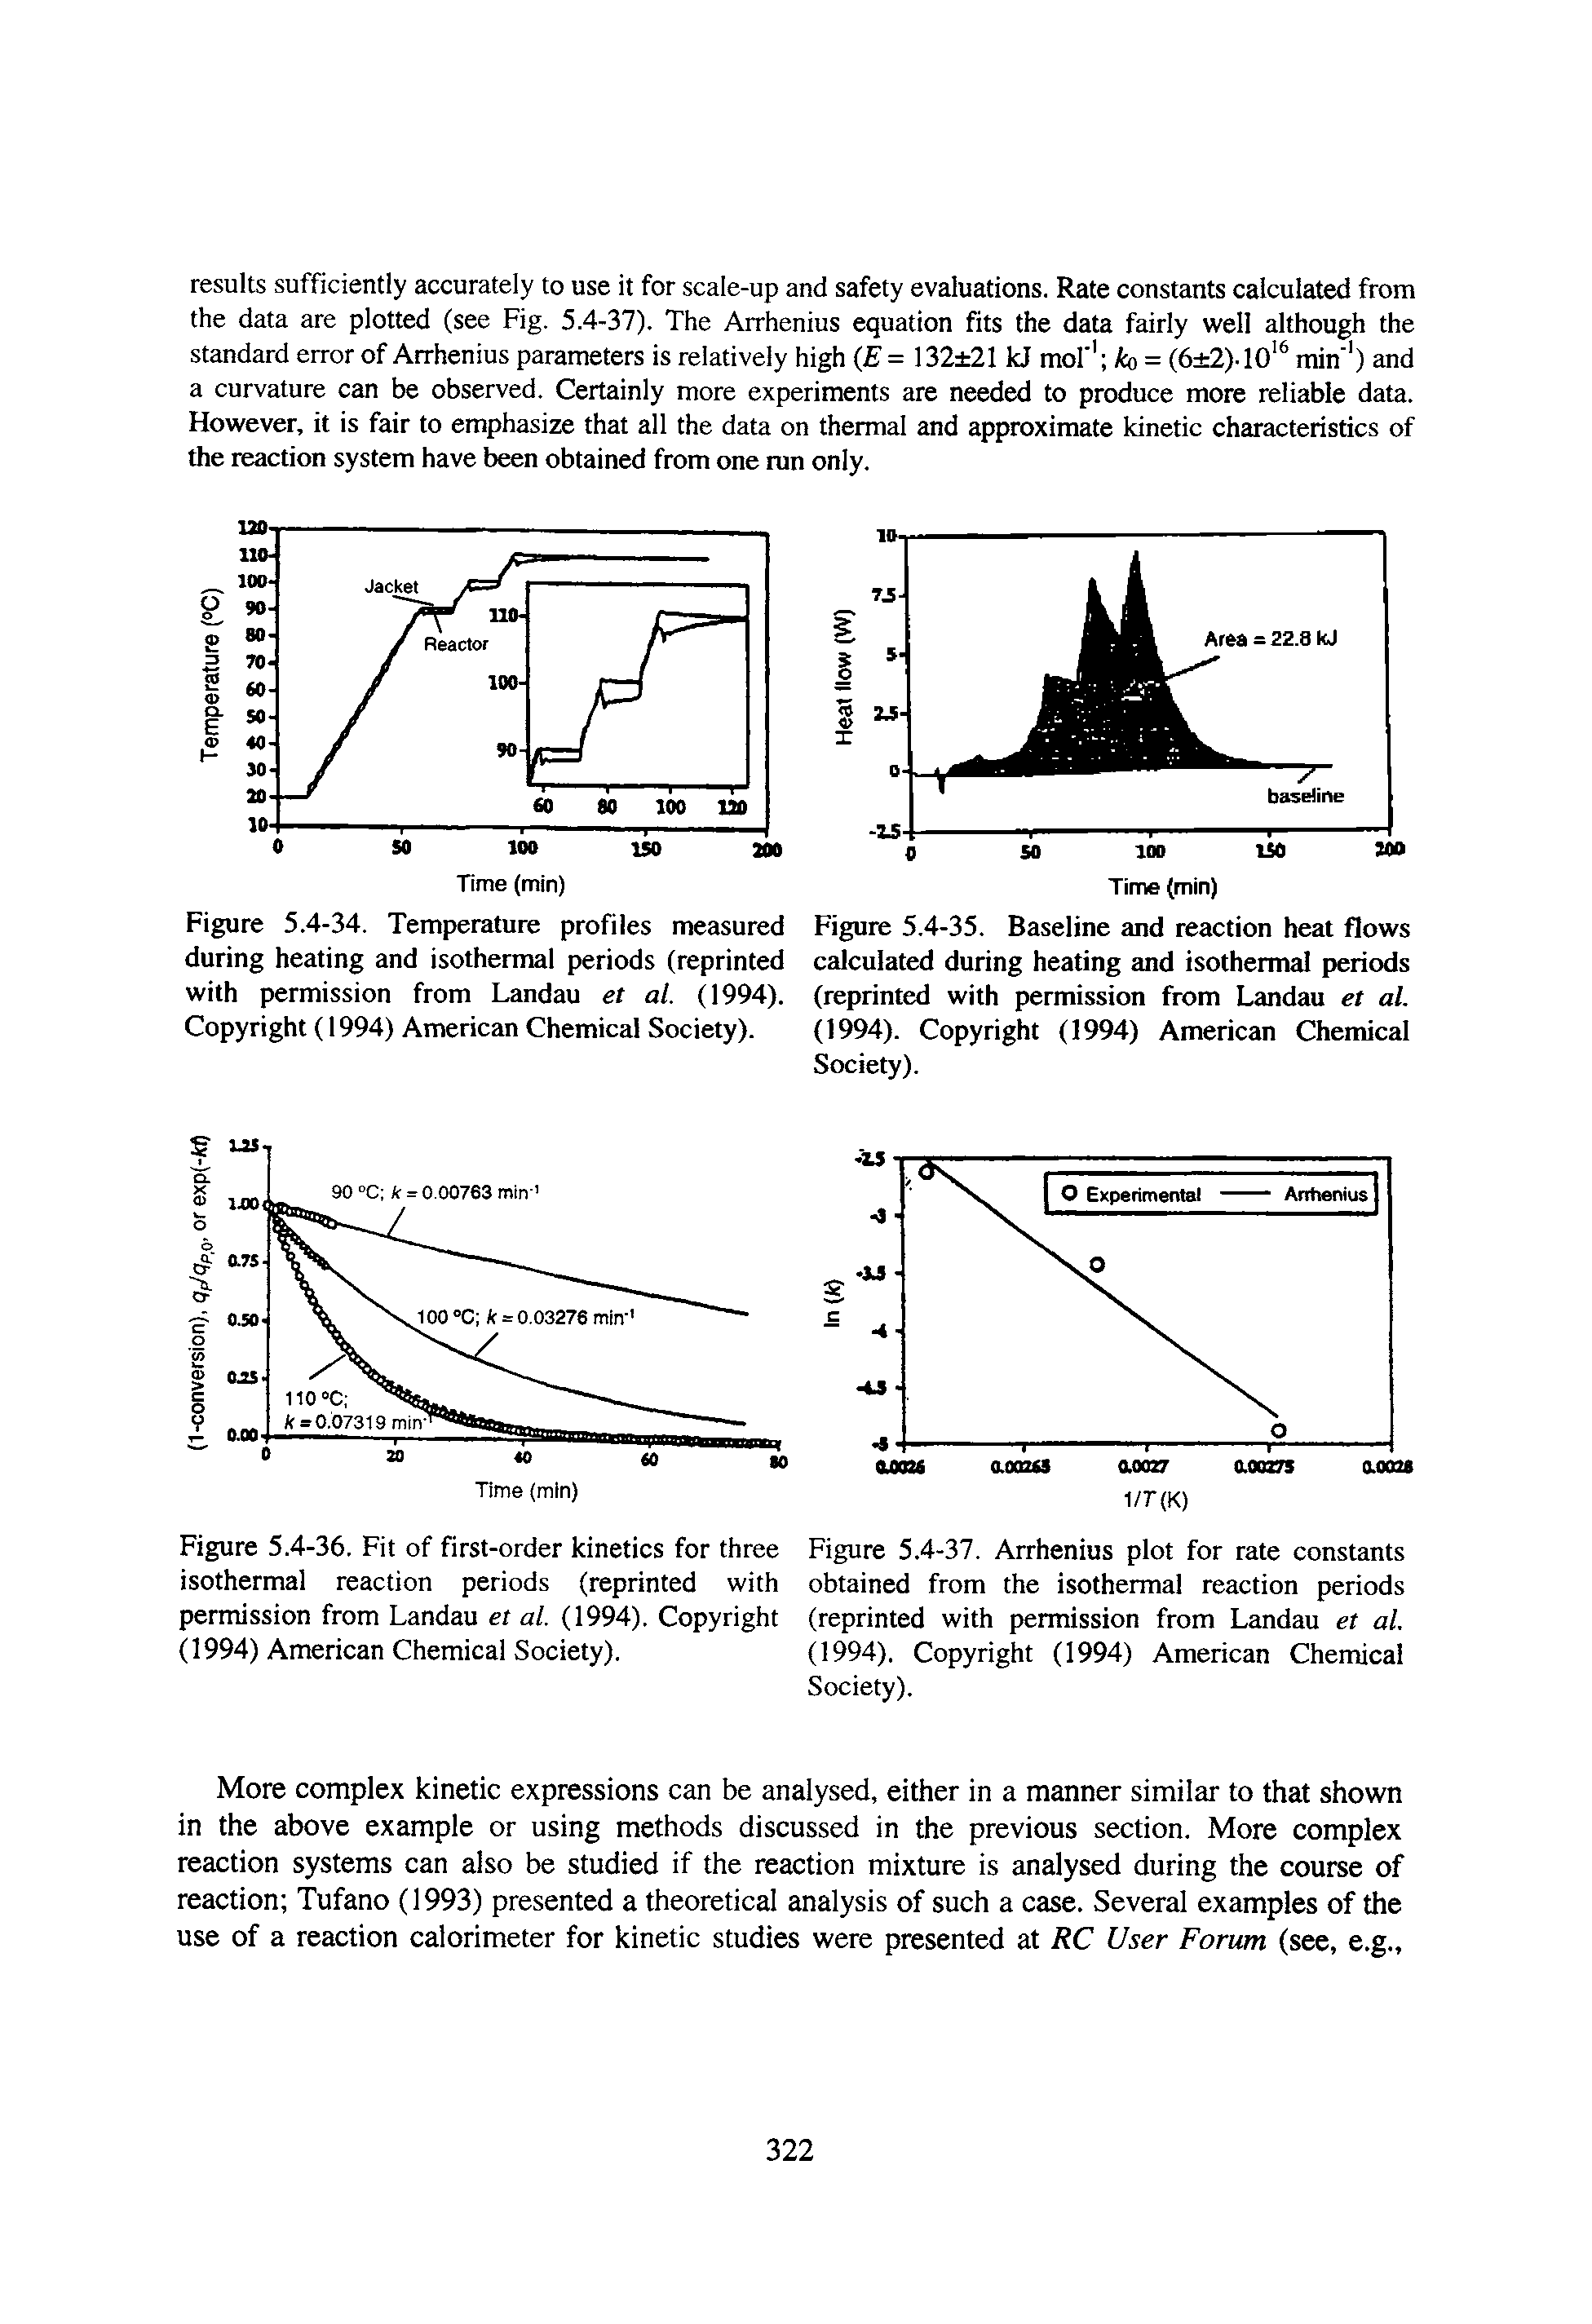 Figure 5.4-35. Baseline and reaction heat flows calculated during heating and isothermal periods (reprinted with permission from Landau et al. (1994). Copyright (1994) American Chemical Society).